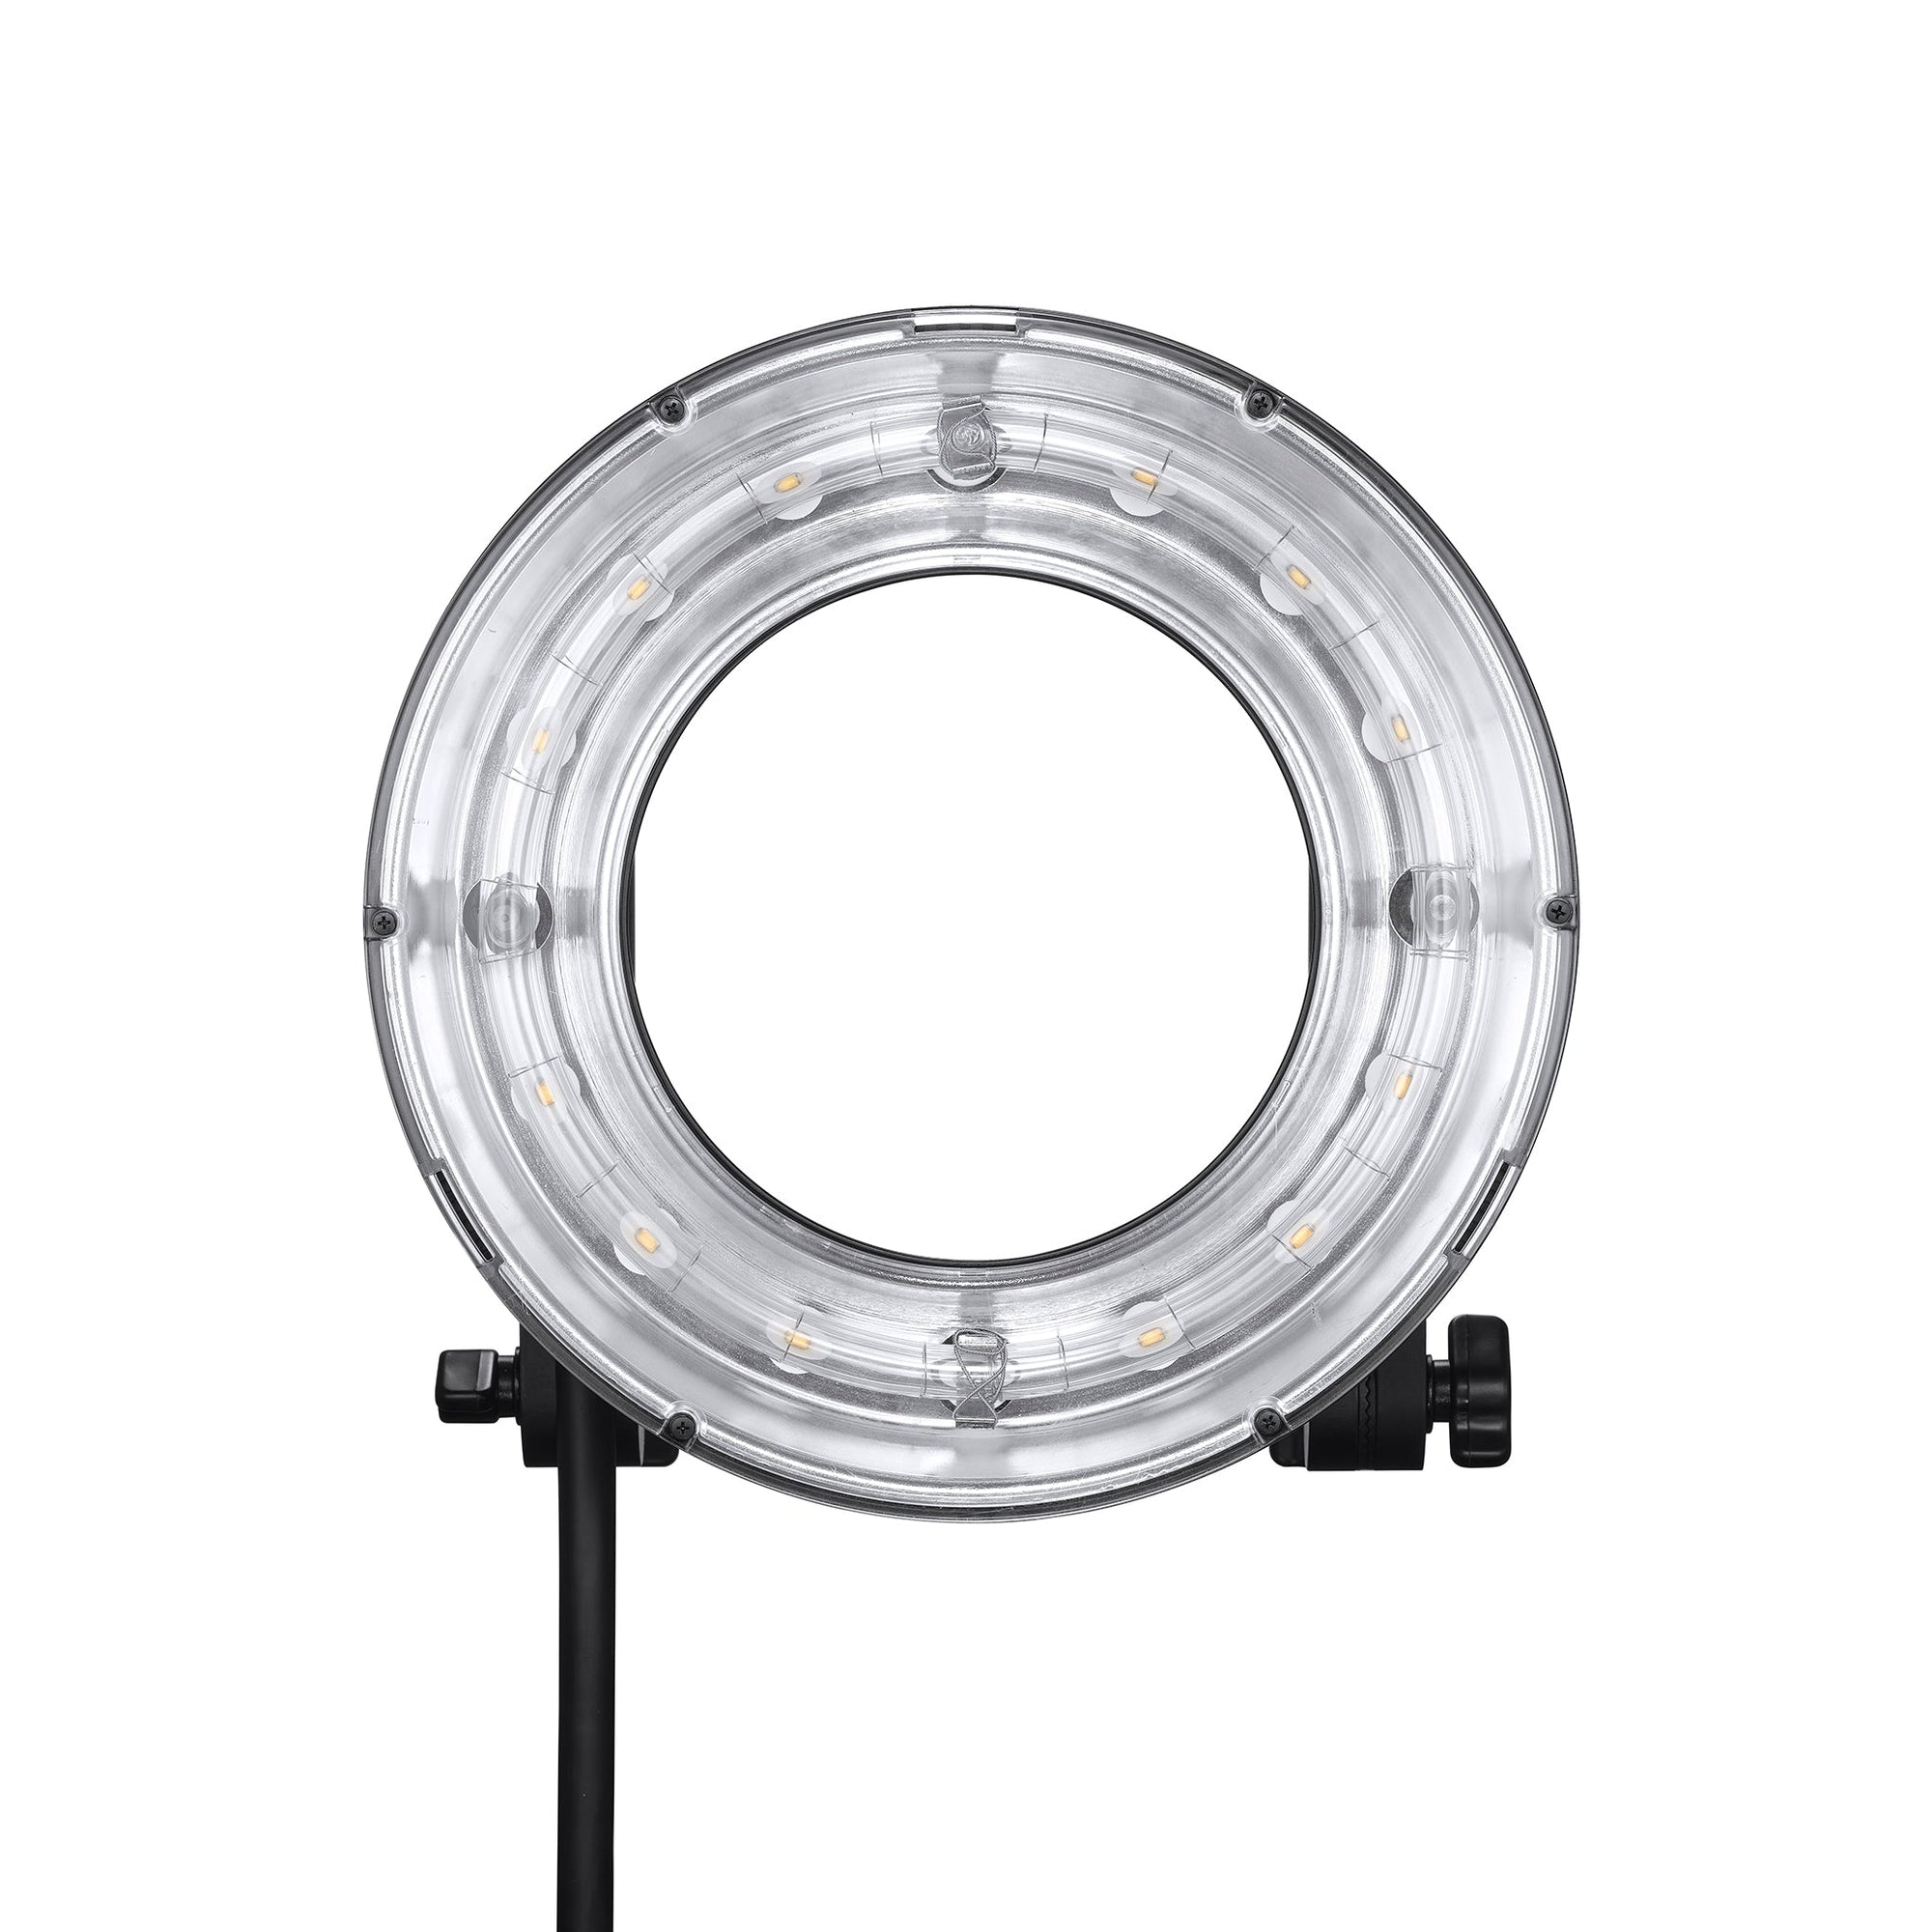 Vtime 14-inch Dimmable LED Ring Light Kit with Folding India | Ubuy